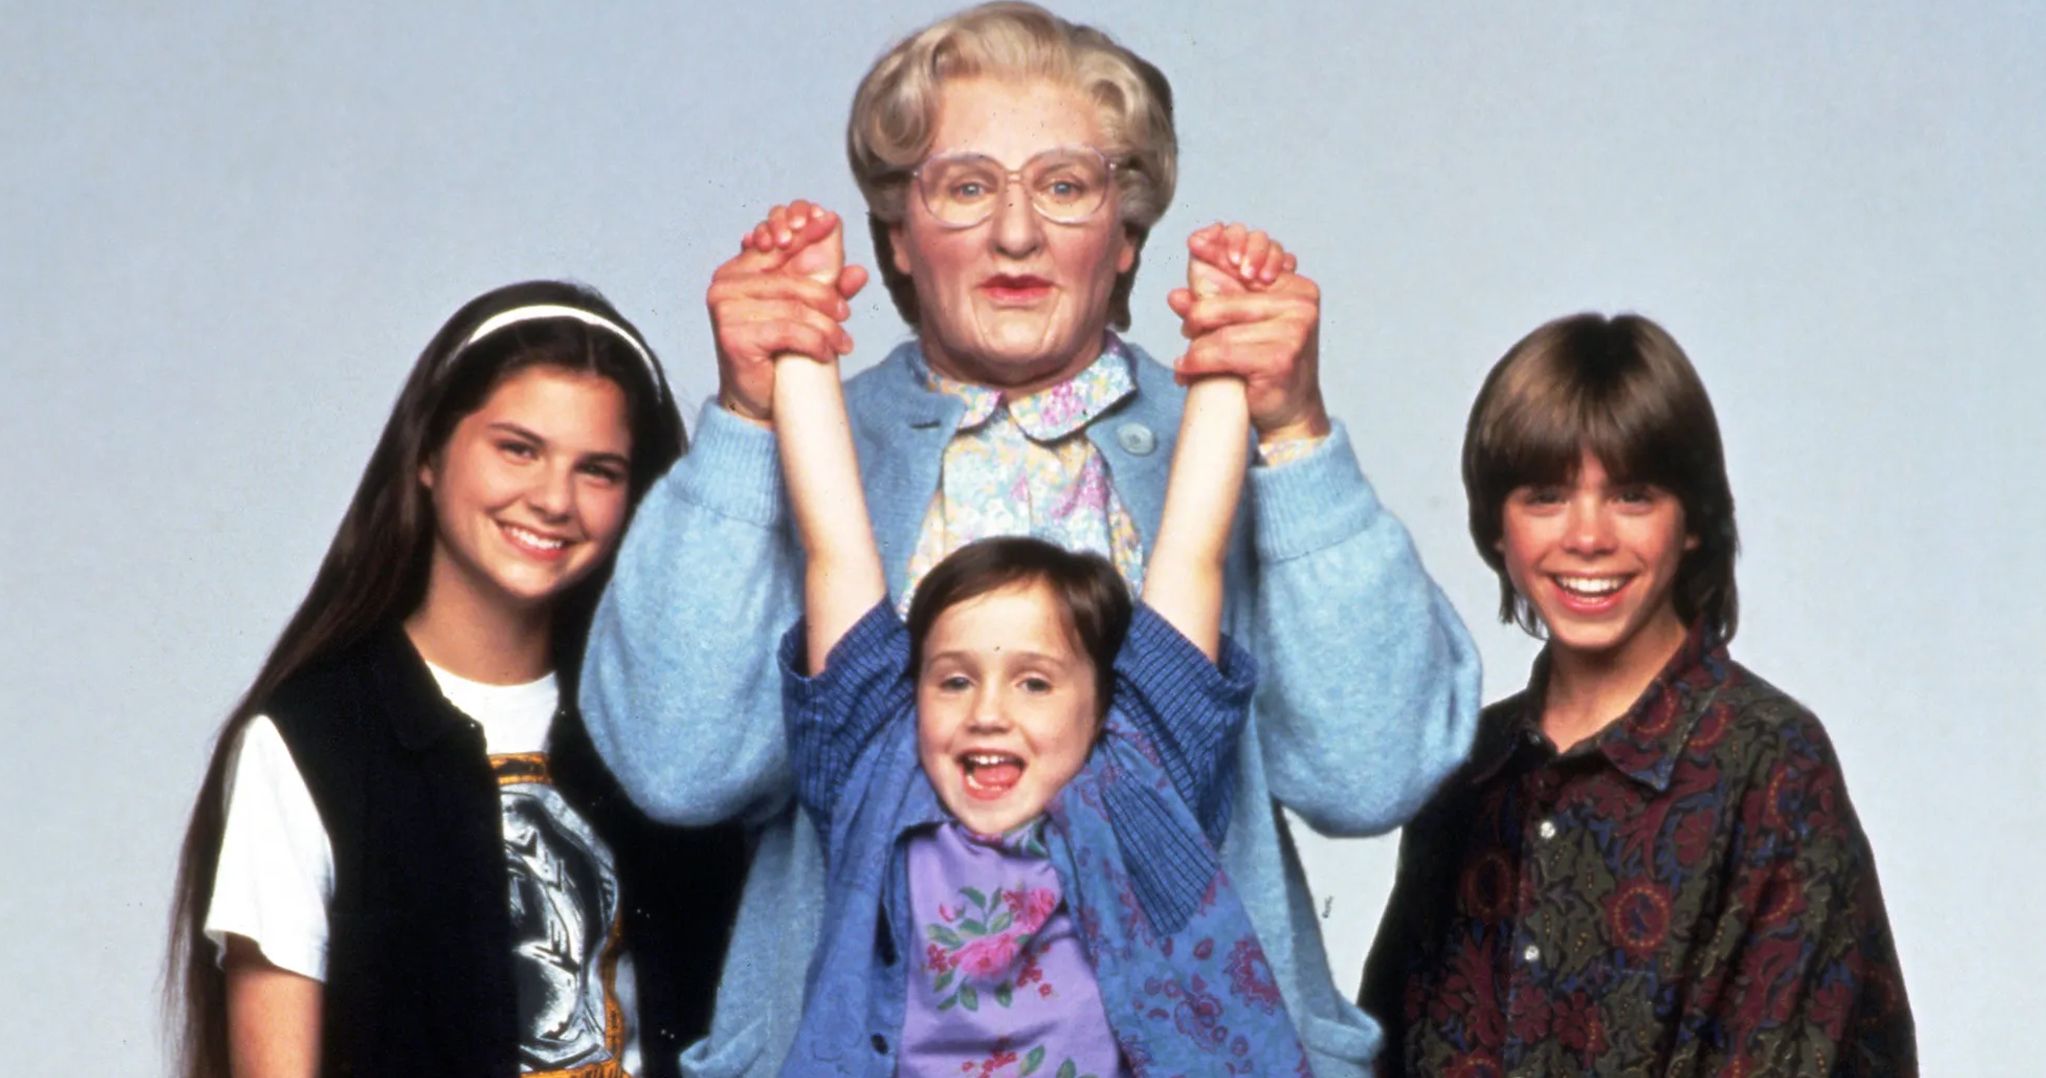 Rumored Mrs. Doubtfire NC-17 Cut Has Robin Williams Fans Demanding to See It